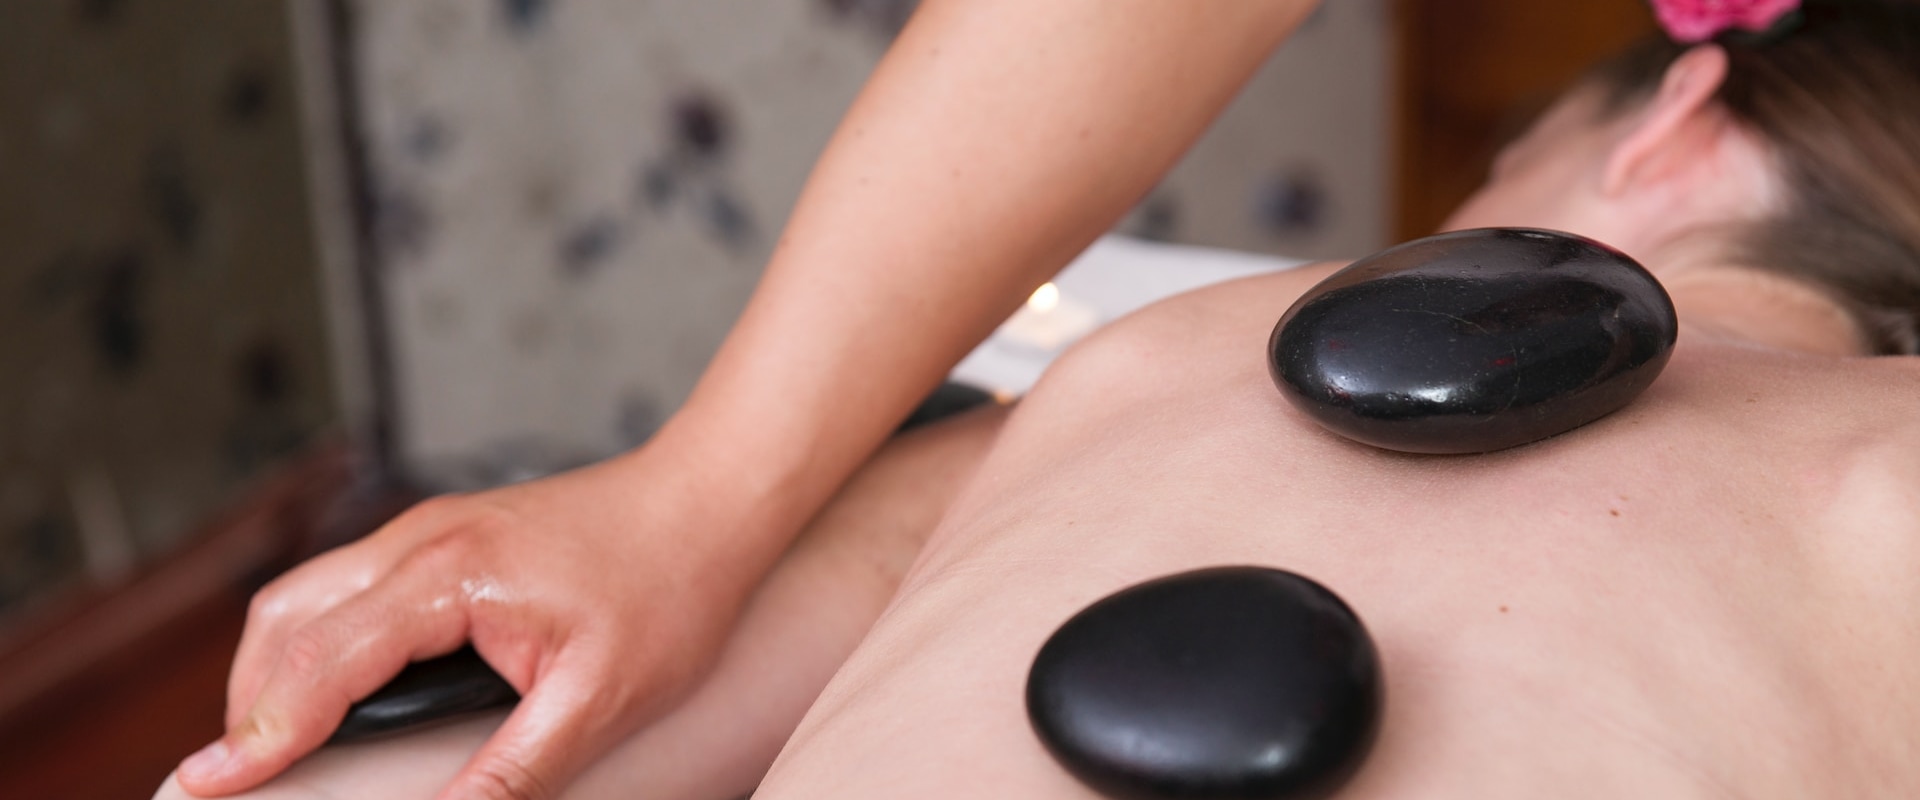 Enhancing Wellbeing In Madrid: The Dynamic Duo Of Osteopathy And Thai Massage Therapy